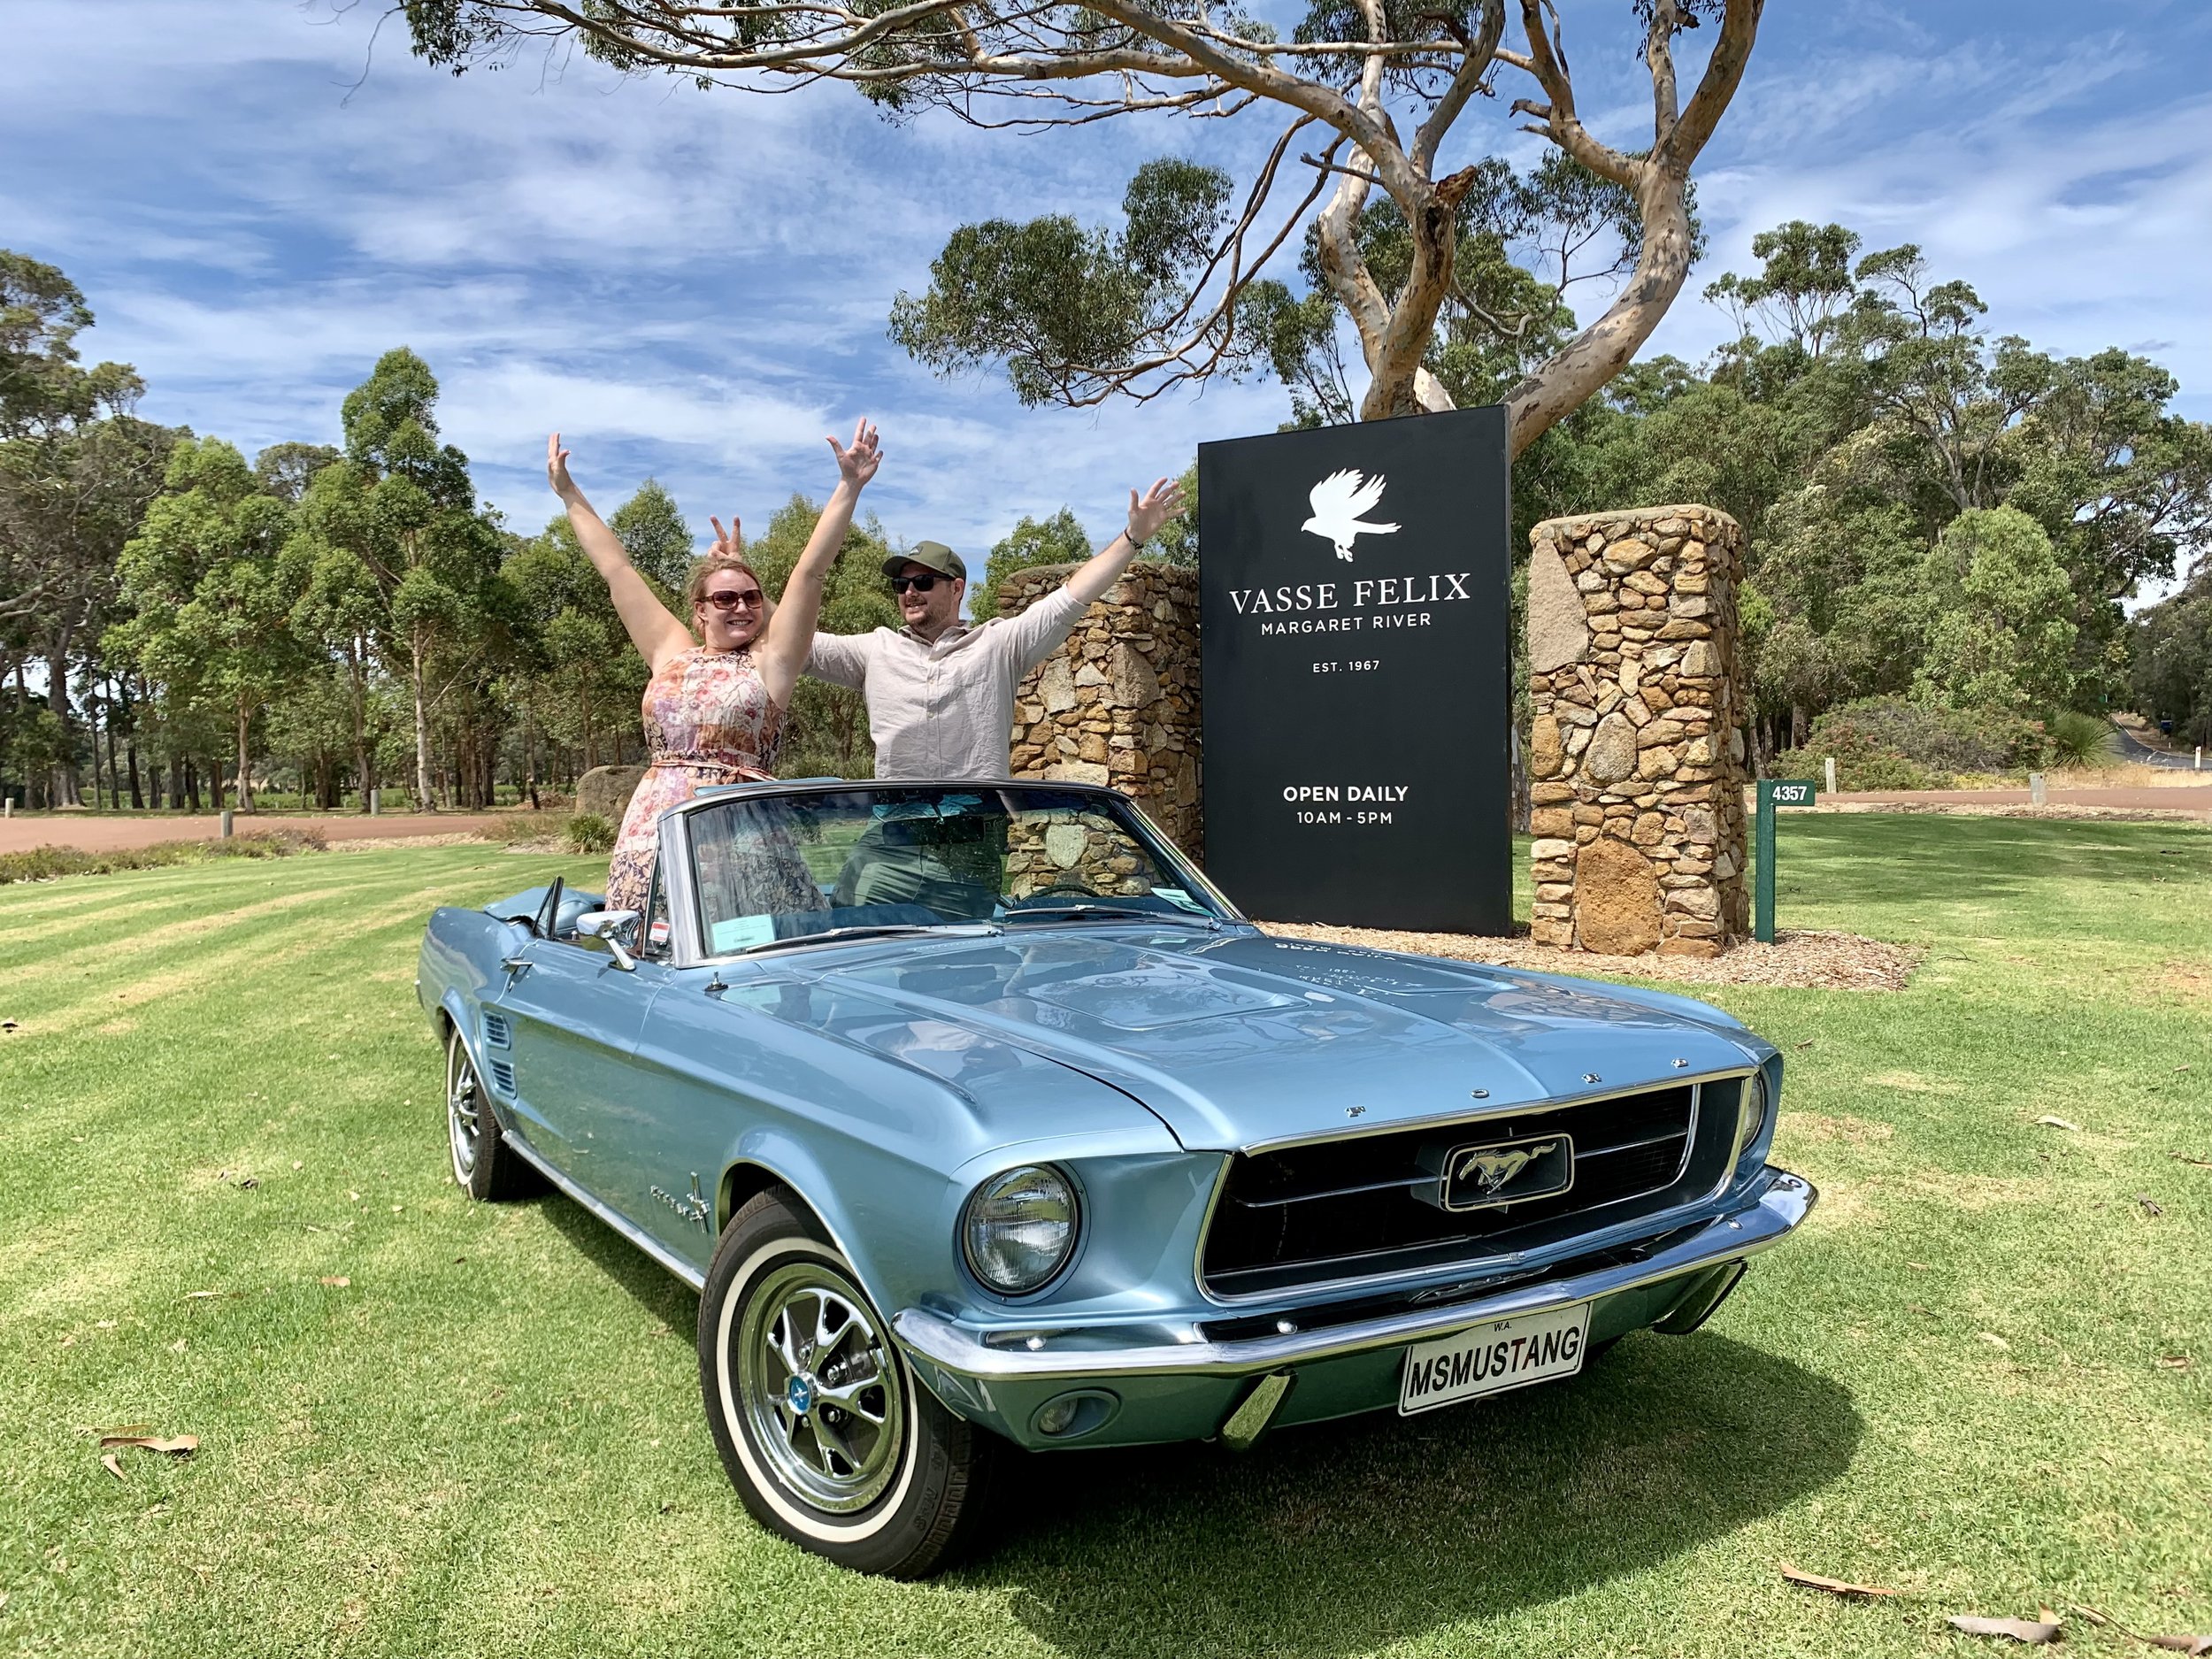 mr mustang hire-private wine tour-classic car-chauffeur-margaret river21.JPG